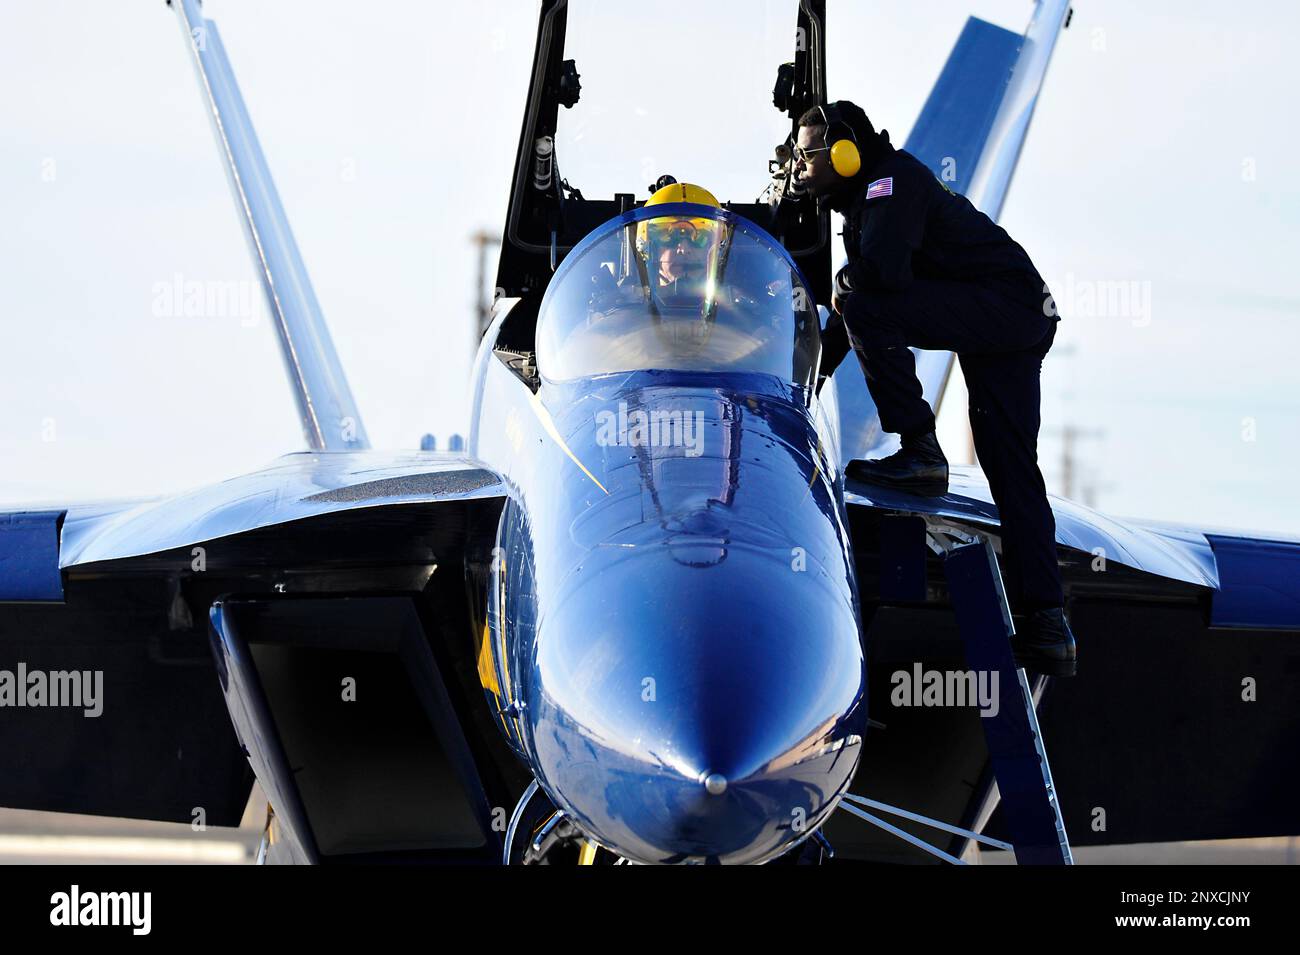 230118-N-KB563-1269 EL CENTRO, Calif. (Jan. 18, 2023) Cmdr. Alex Armatas, commanding officer and flight leader of the U.S. Navy Flight Demonstration Squadron, the Blue Angels, prepares for takeoff prior to a training flight over Naval Air Facility (NAF) El Centro. The Blue Angels are currently conducting winter training at NAF El Centro, California, in preparation for the upcoming 2023 air show season. Stock Photo